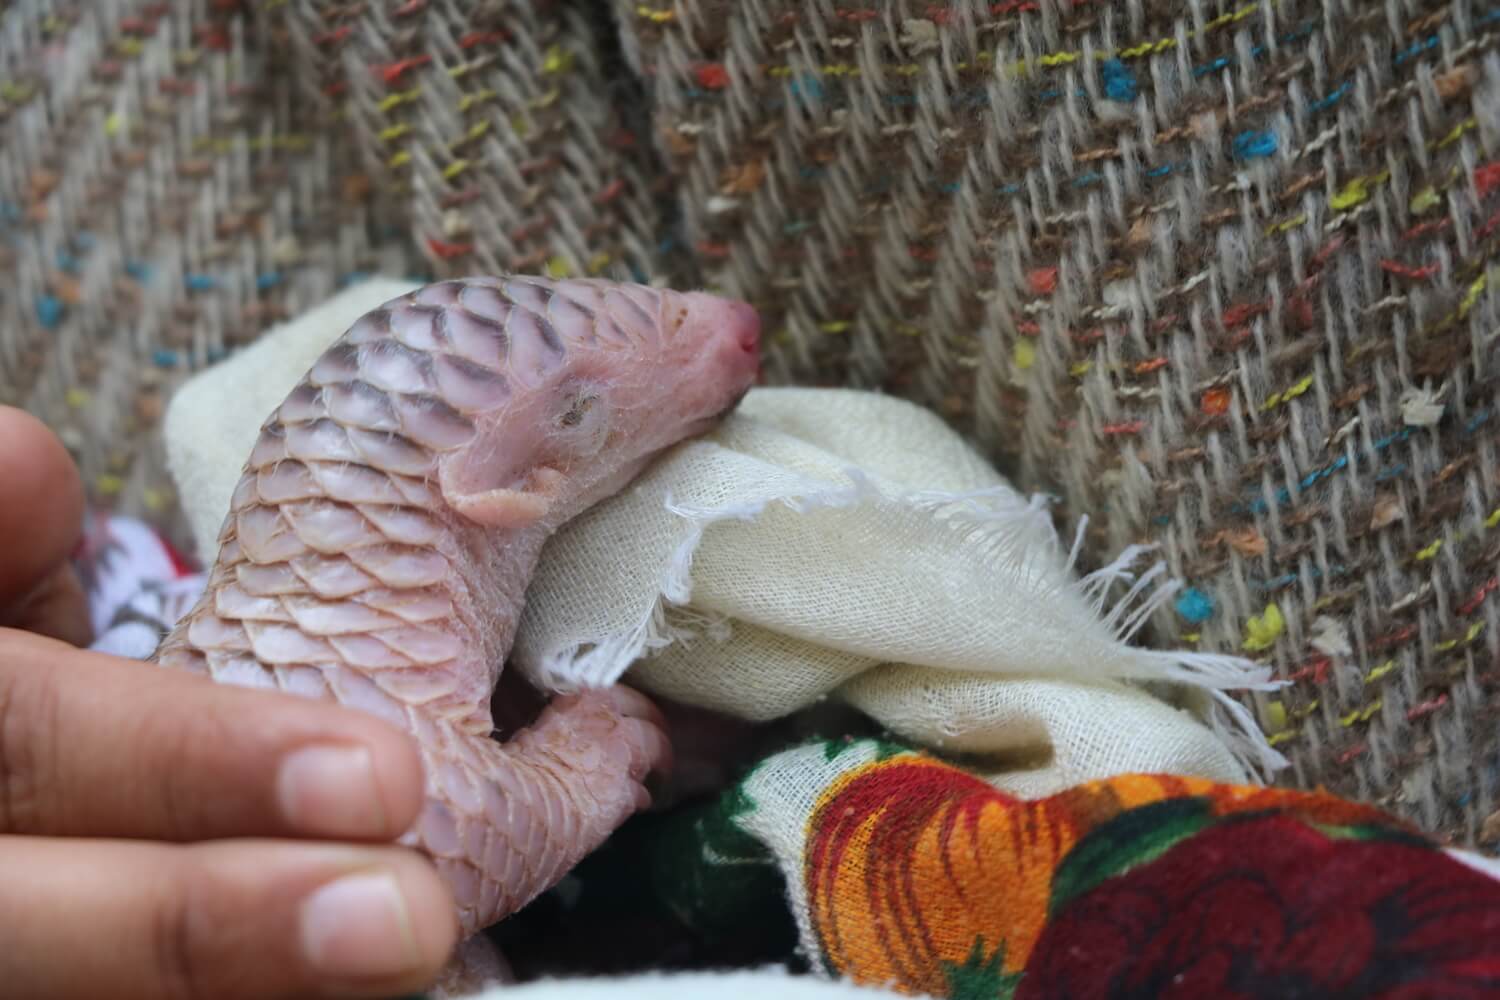 Protecting pangolins in the pandemic